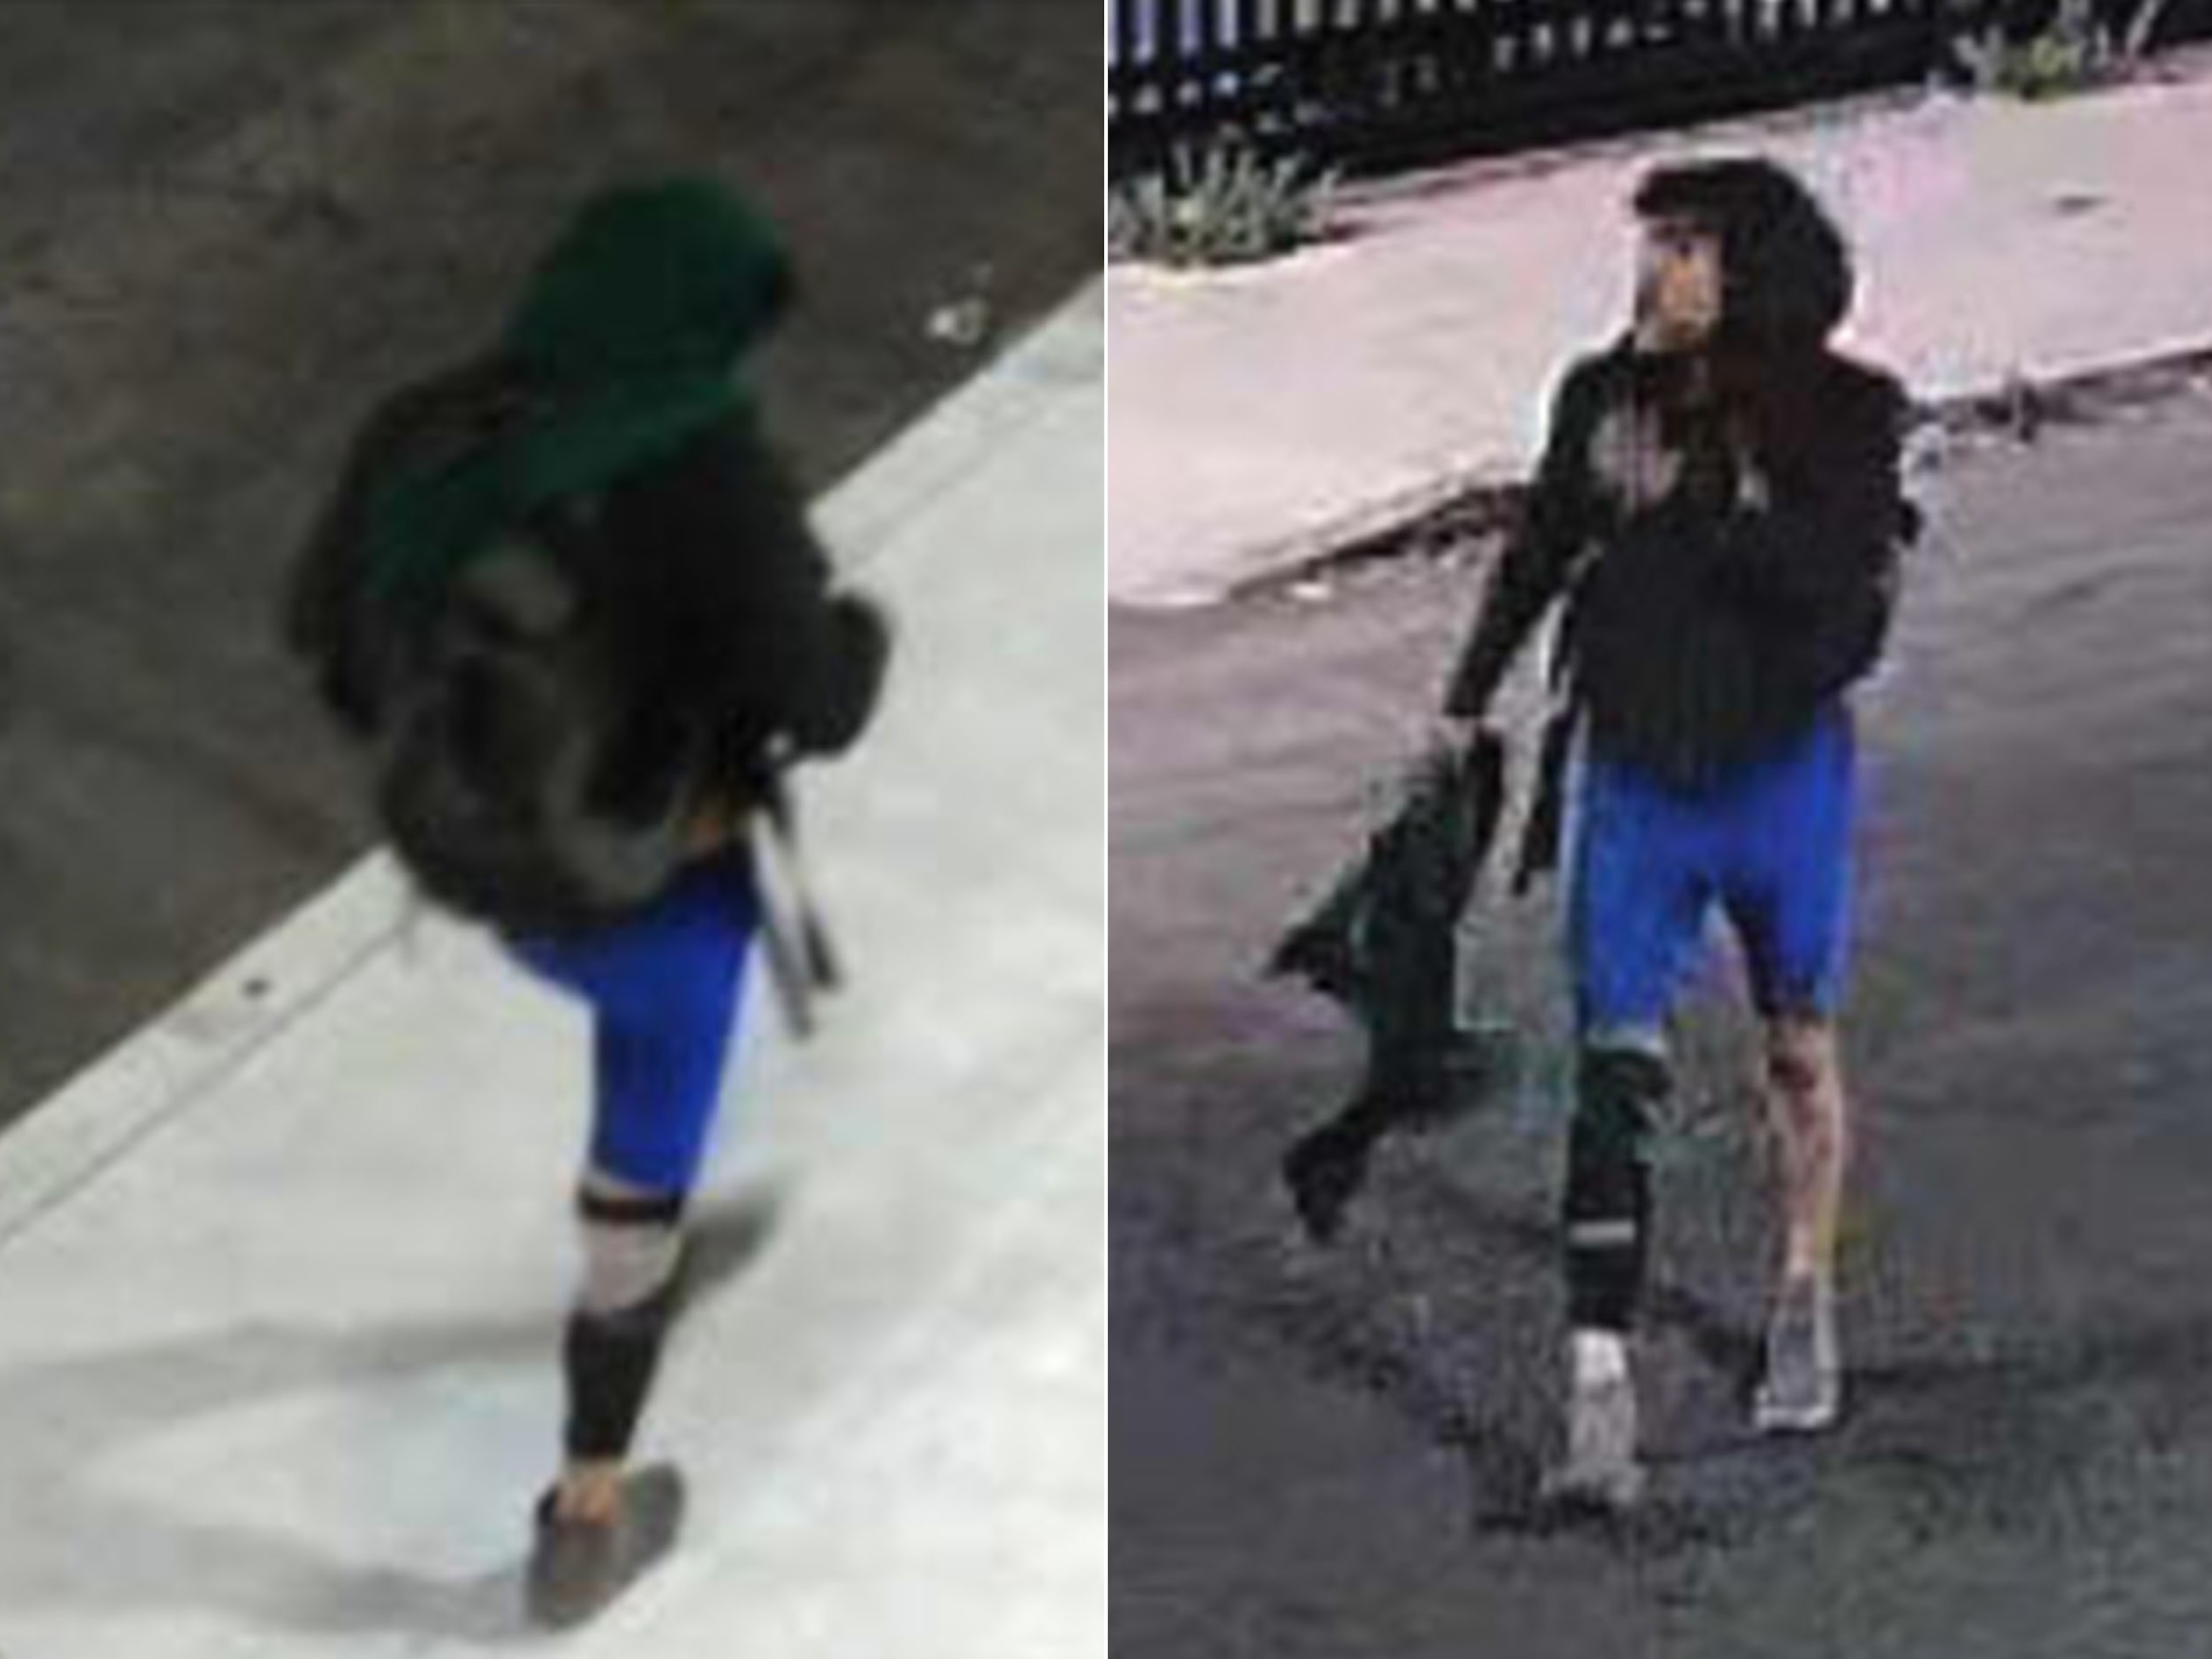 PHOTO: CAL FIRE released images of a subject of interest sought in connection with a Nov. 11 fire that damaged a large section of the I-10 freeway near downtown Los Angeles.